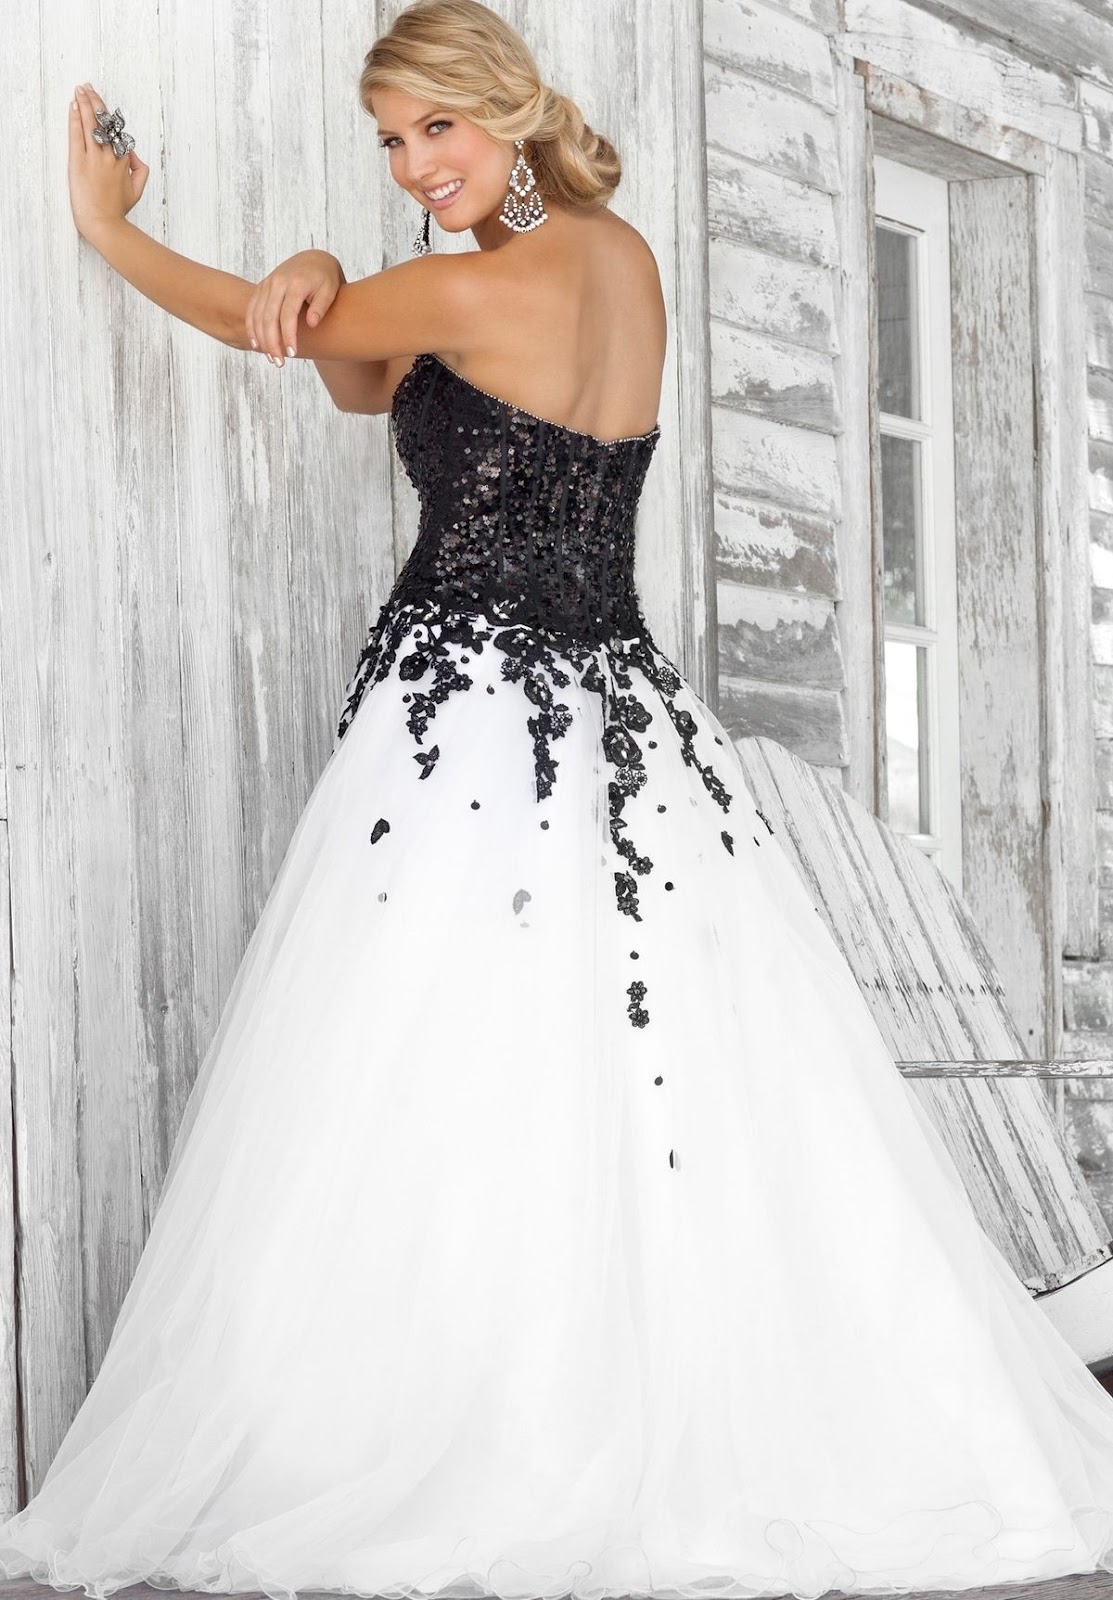 WhiteAzalea Ball Gowns White Ball Gowns with Color Accents